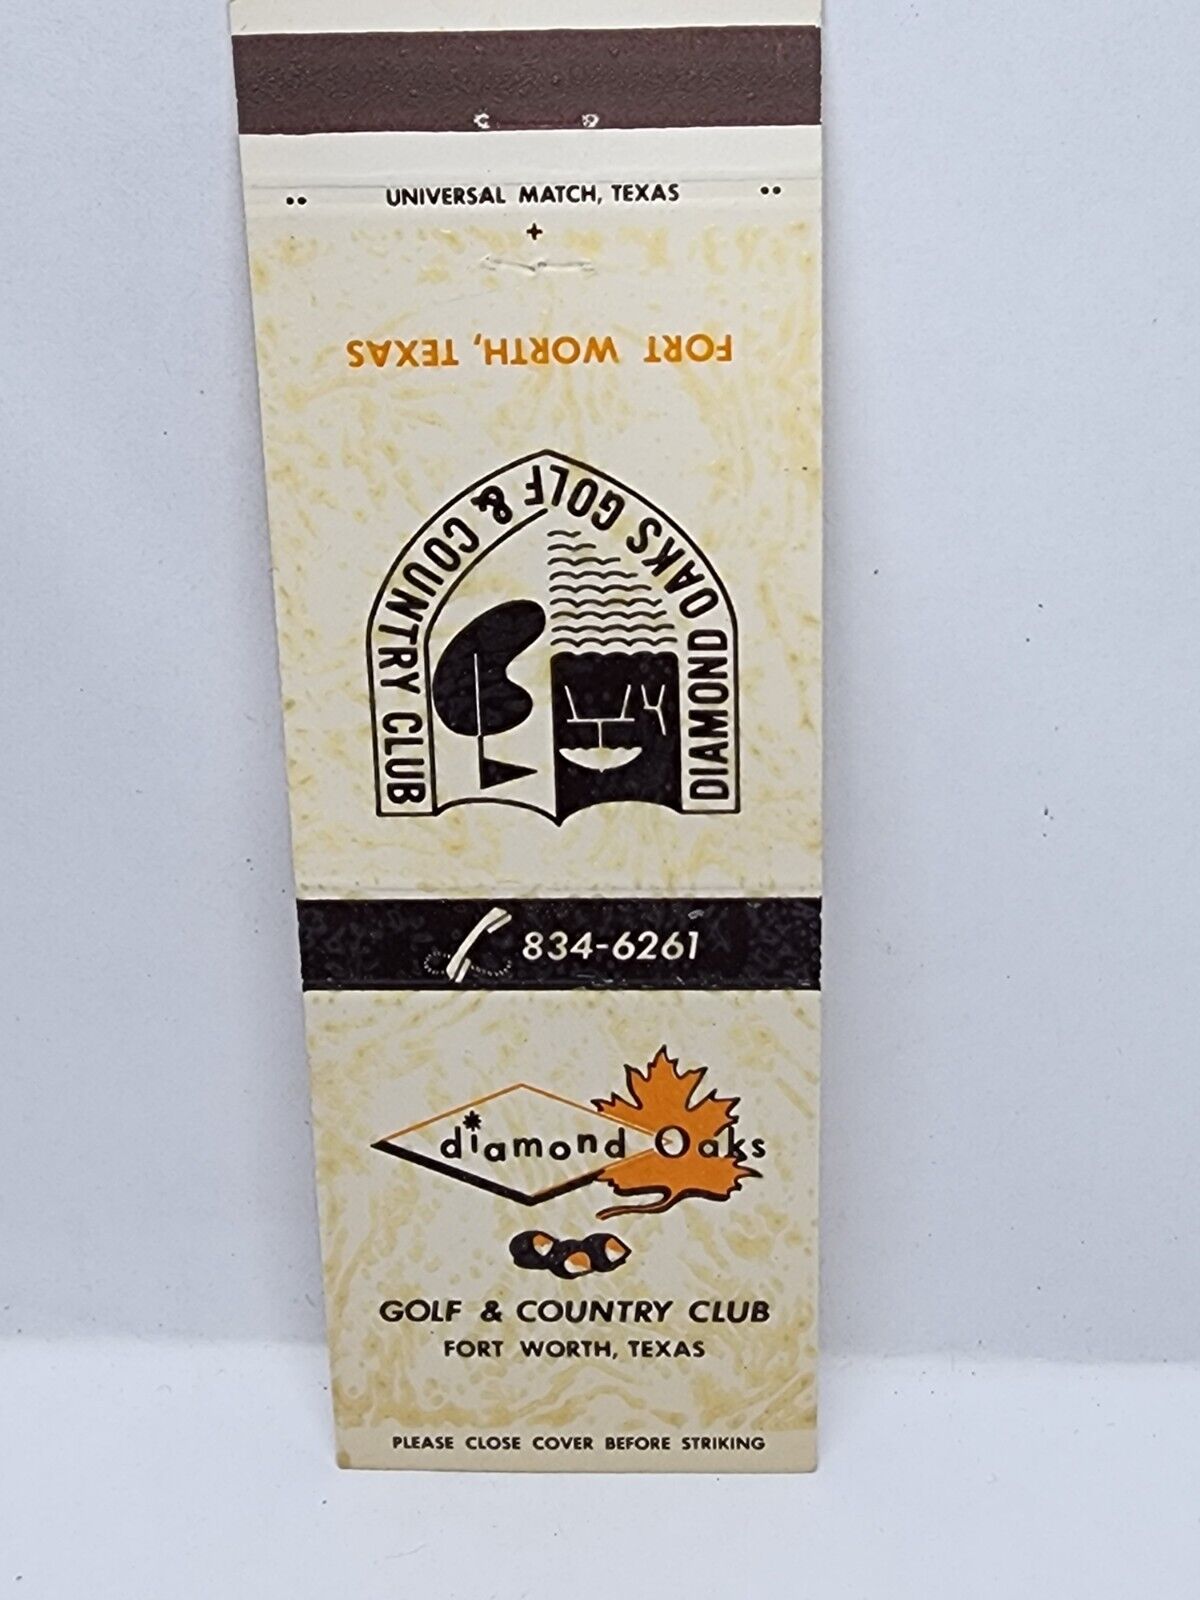 Vintage Matchbook Cover - DIAMOND OAKS Golf & Country Club Fort Worth Texas TX